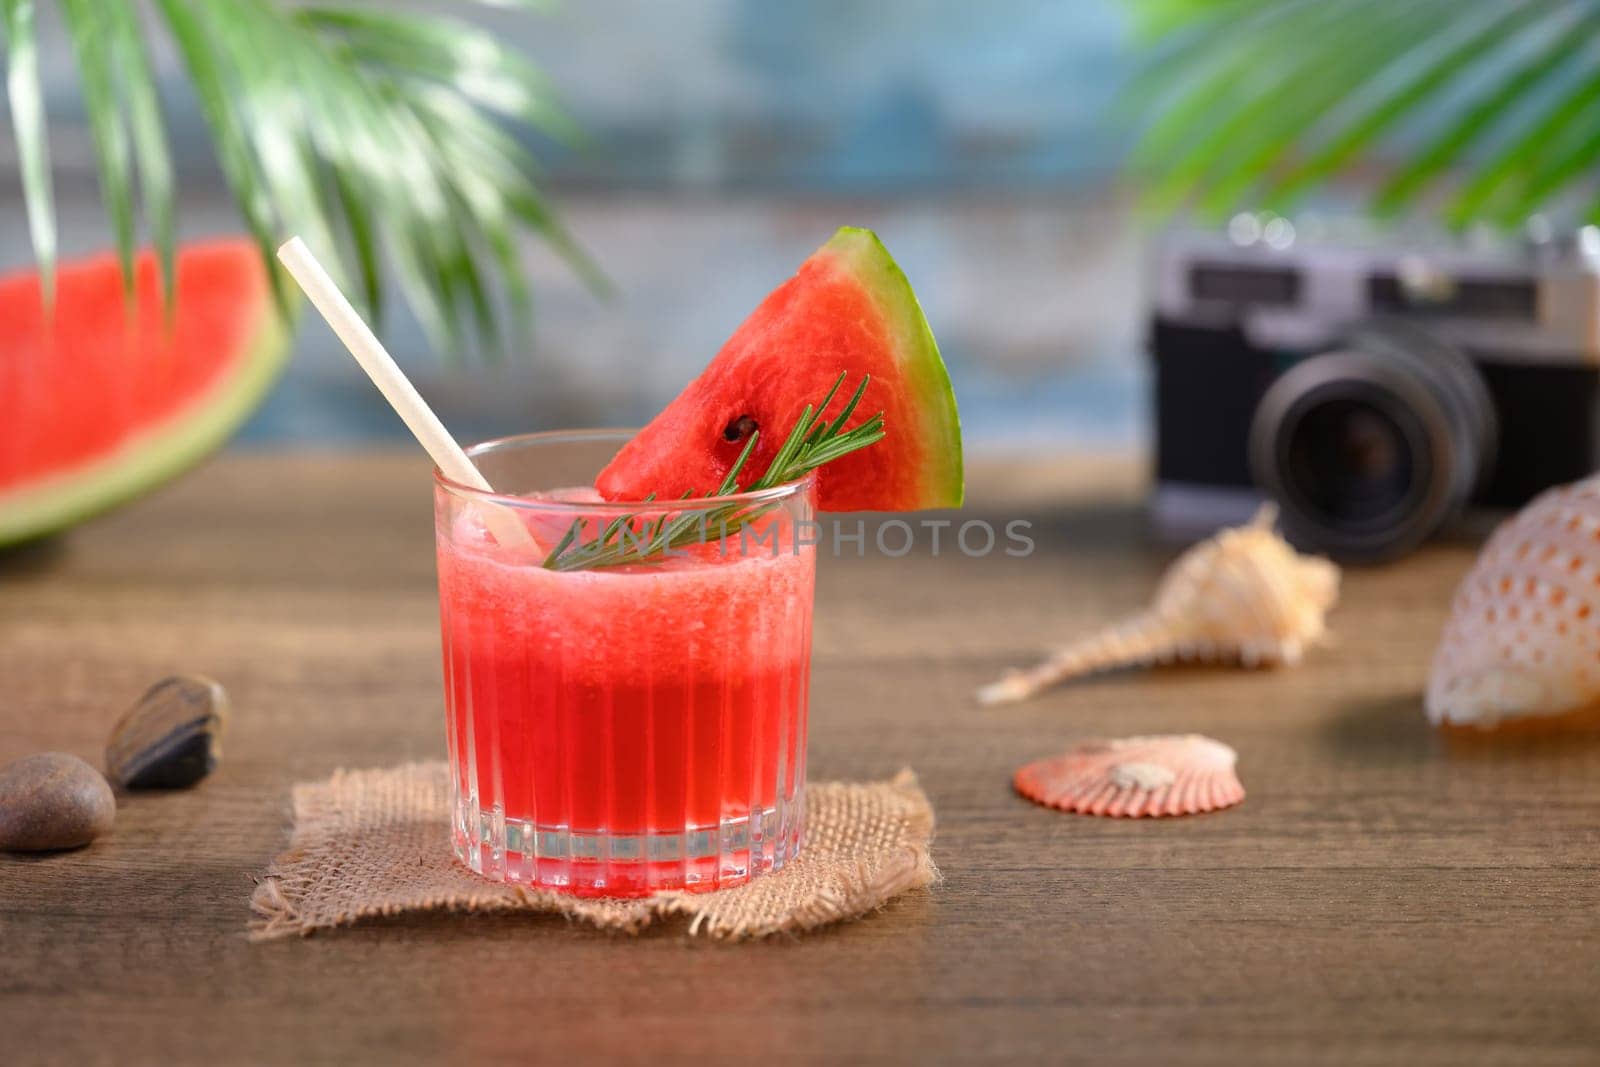 Glass of fresh watermelon juice on wooden table with seashells and camera. Summer drink concept.